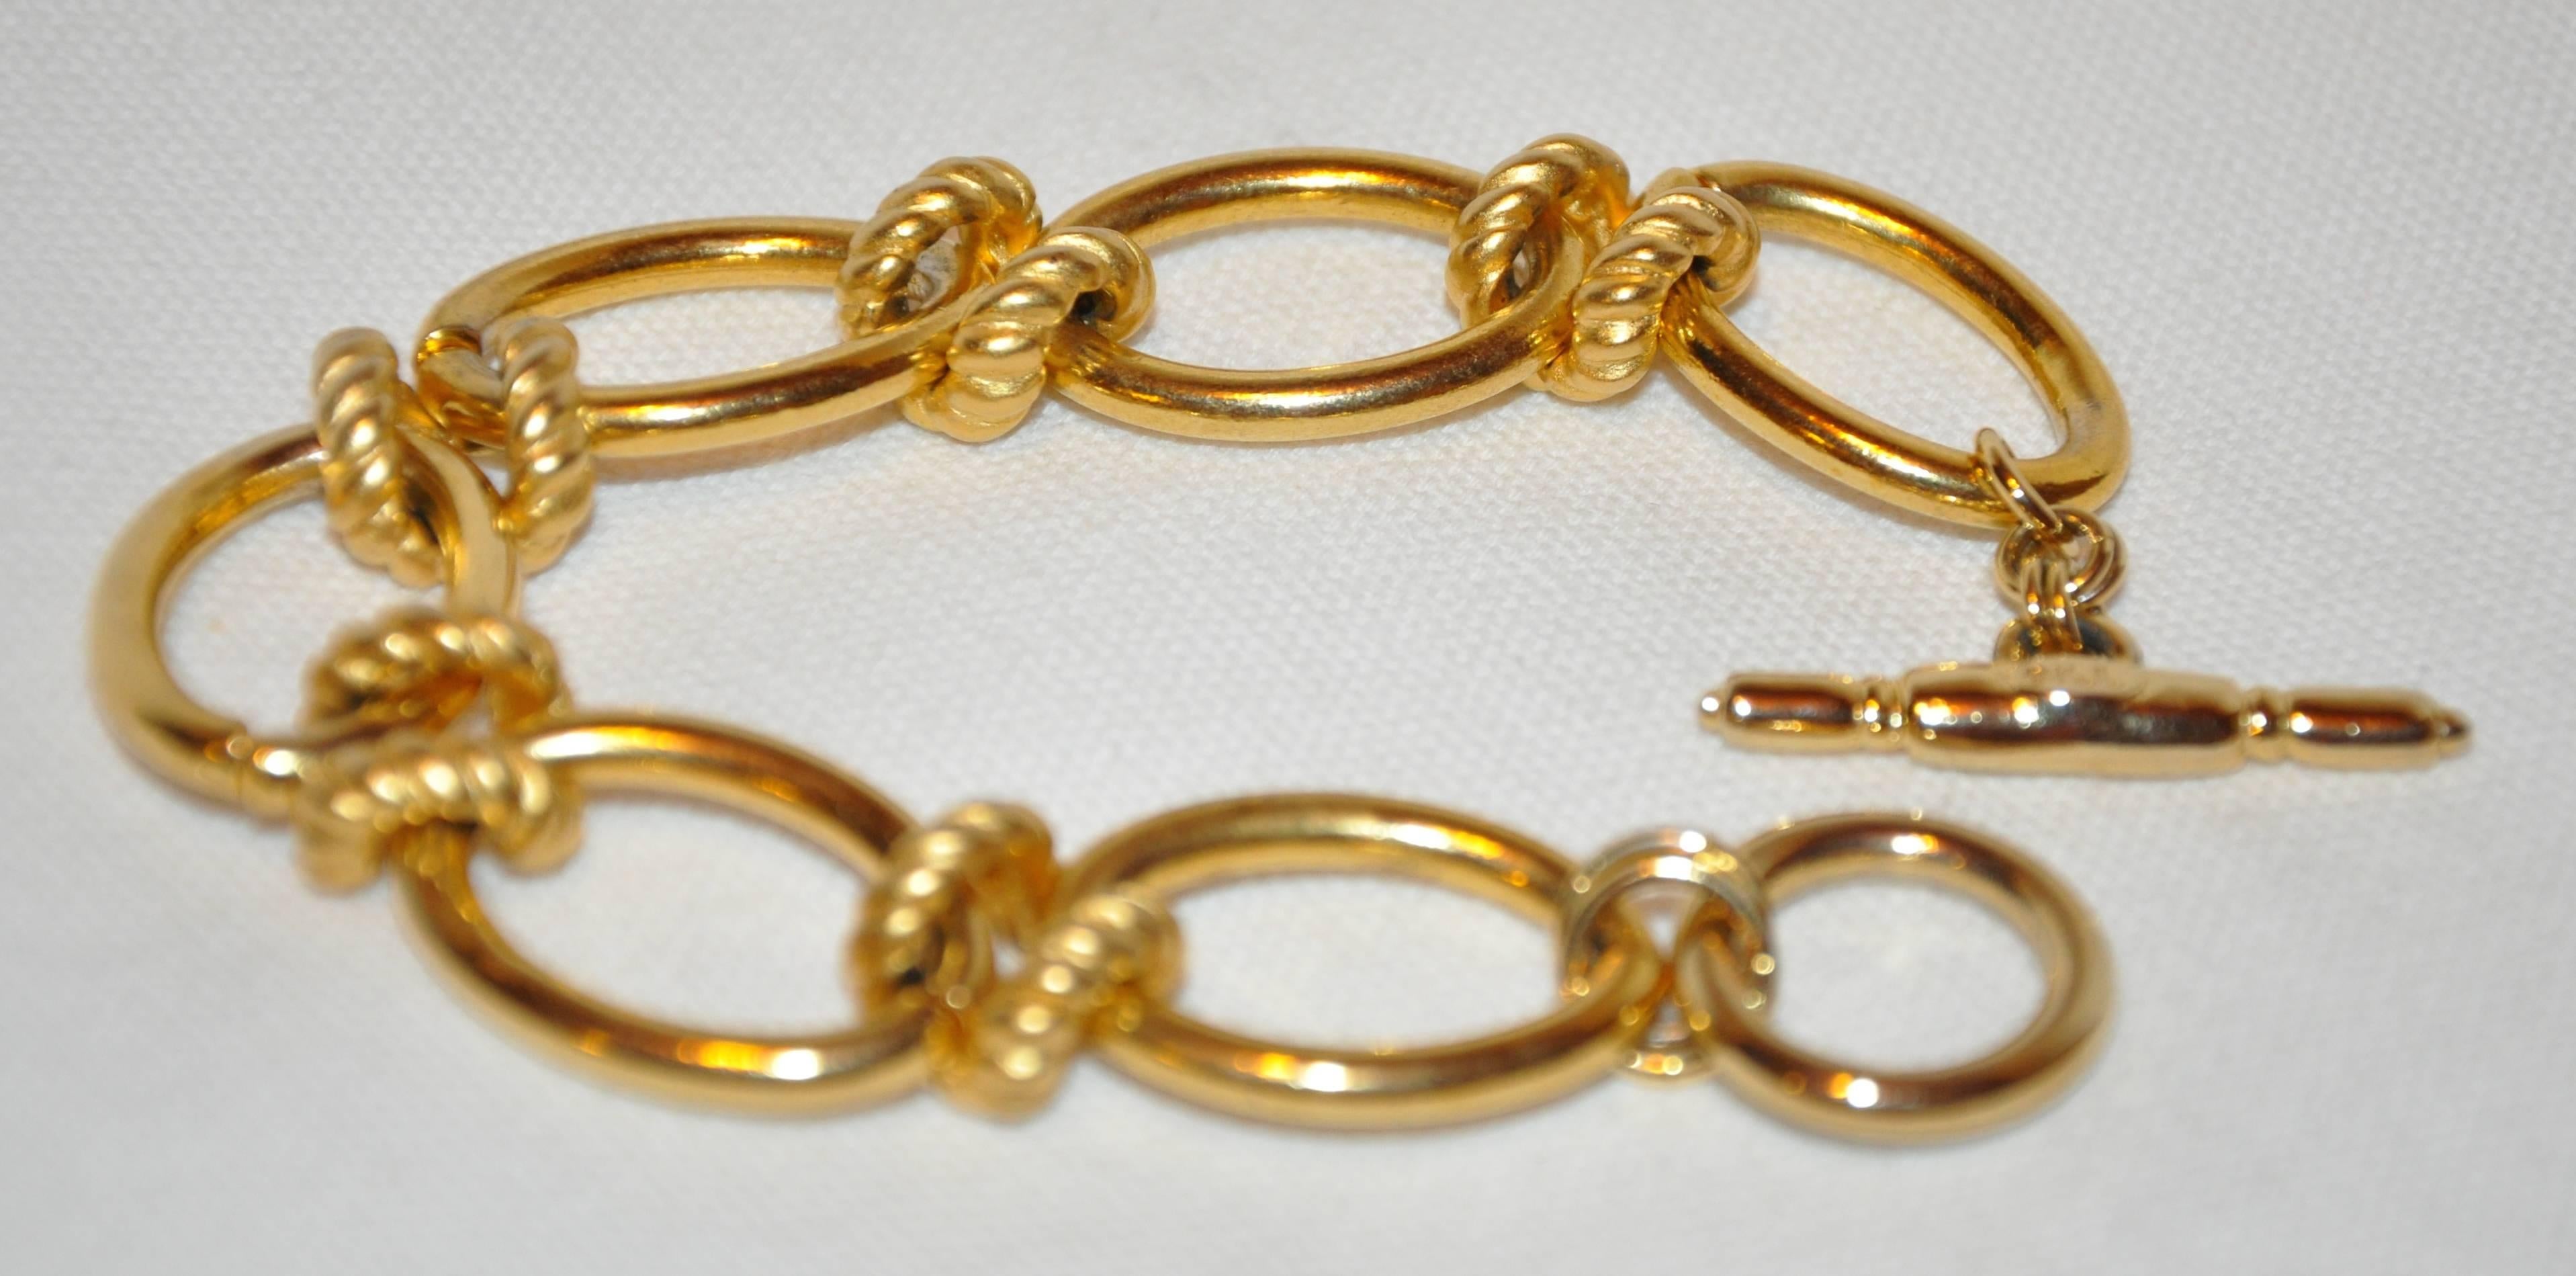        Kenneth Jay Lane wonderful combination of multi-textured as well as glide gold vermeil finish hardware chain-link bracelet measures 8 inches in length and 6/8 inch in width. Made in United States.